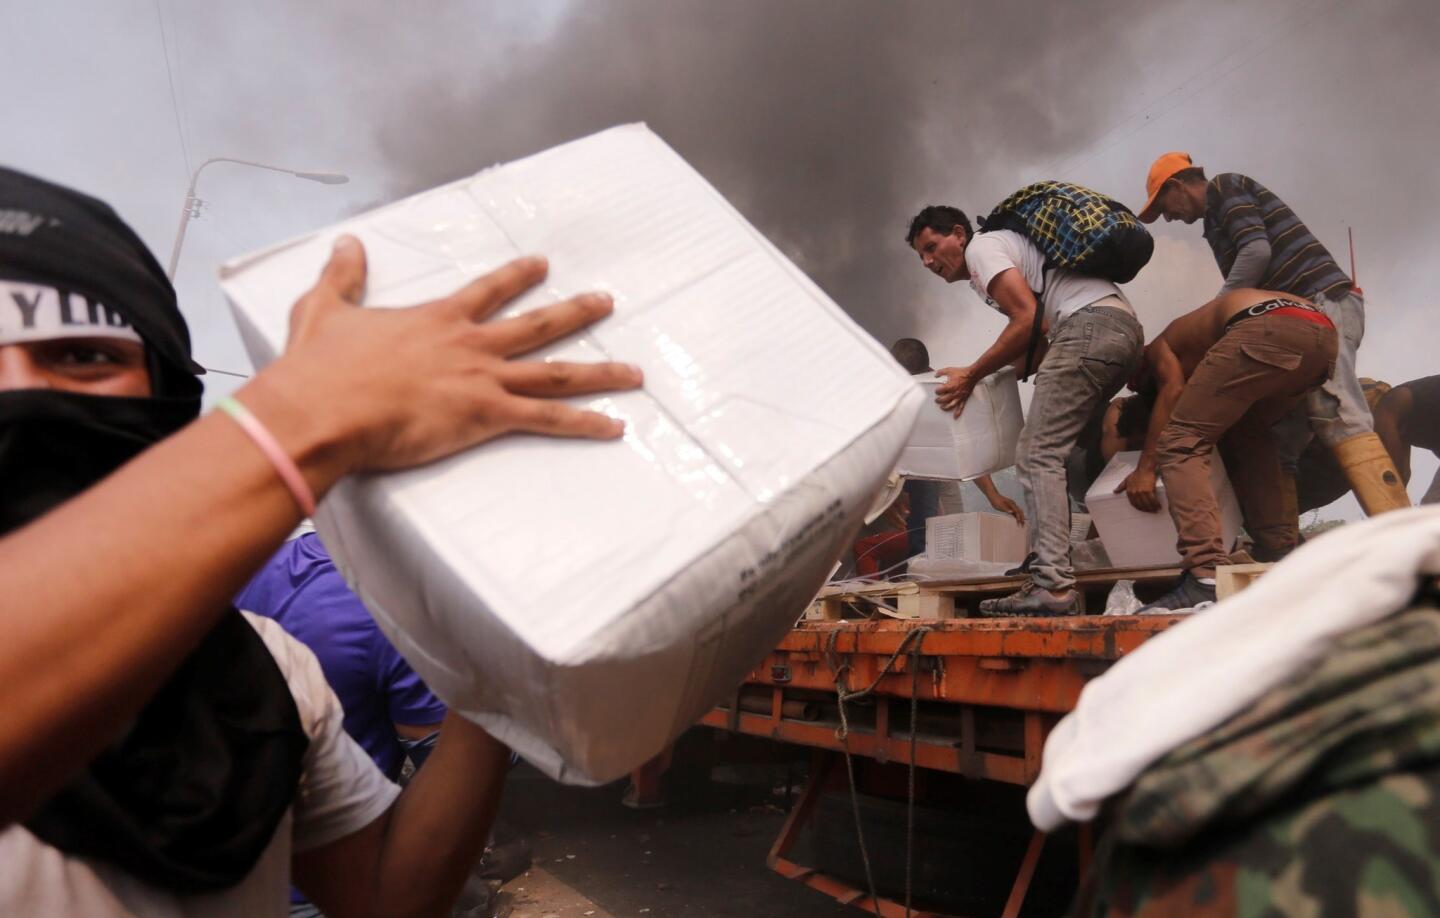 People try to take part of the humanitarian aid from a truck that was set on fire in Urena, Venezuela, on Saturday. Two trucks with aid requested by the opposition were burned by Venezuelan security forces at a border bridge with Colombia.